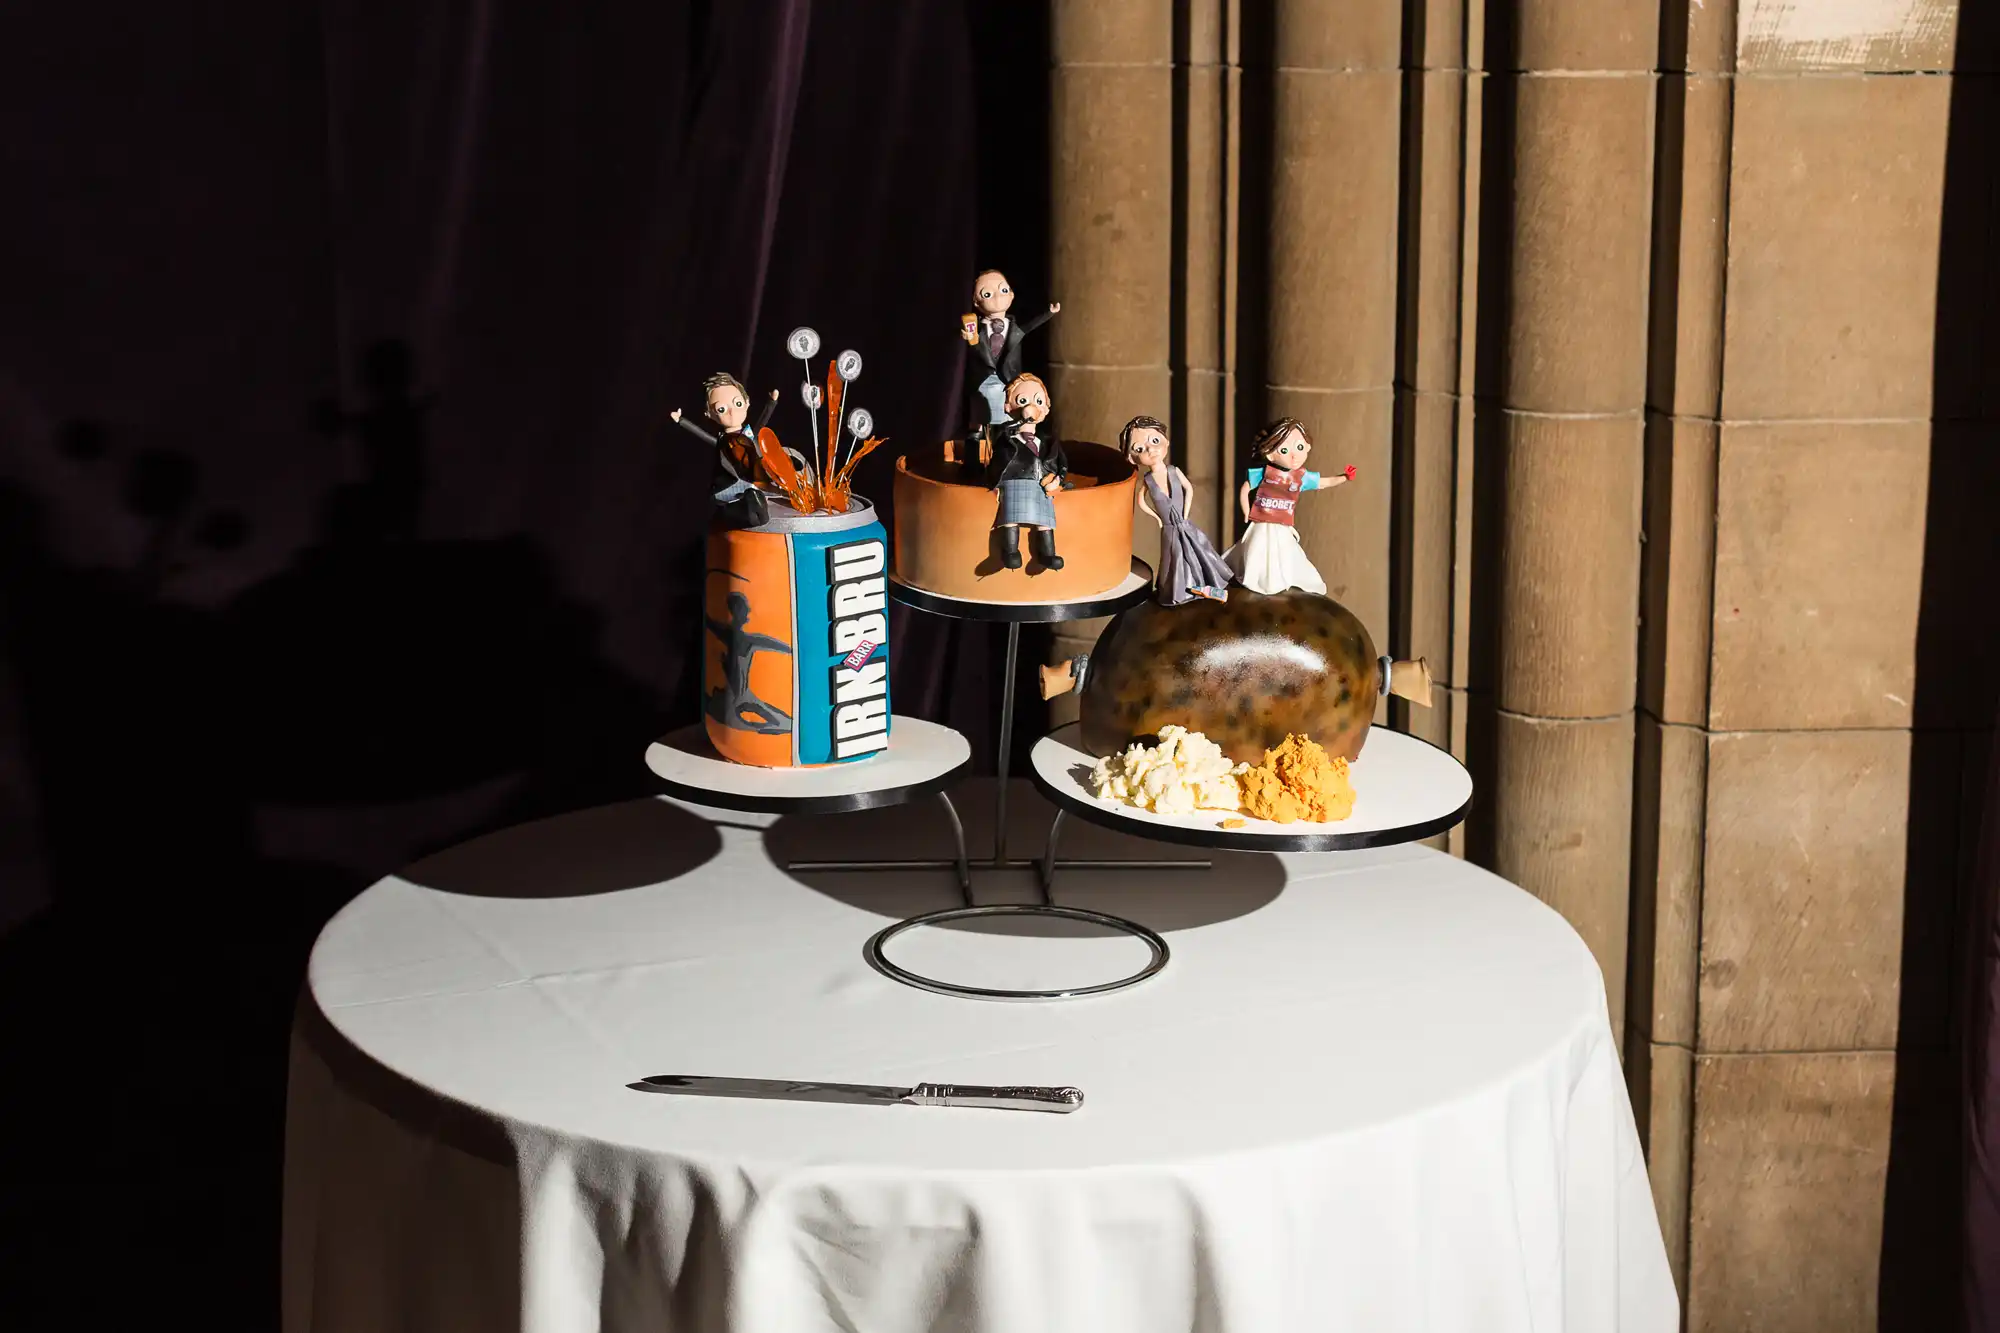 A unique wedding cake display featuring three tiers with customized figurine toppers representing different personal interests, illuminated by spotlight.